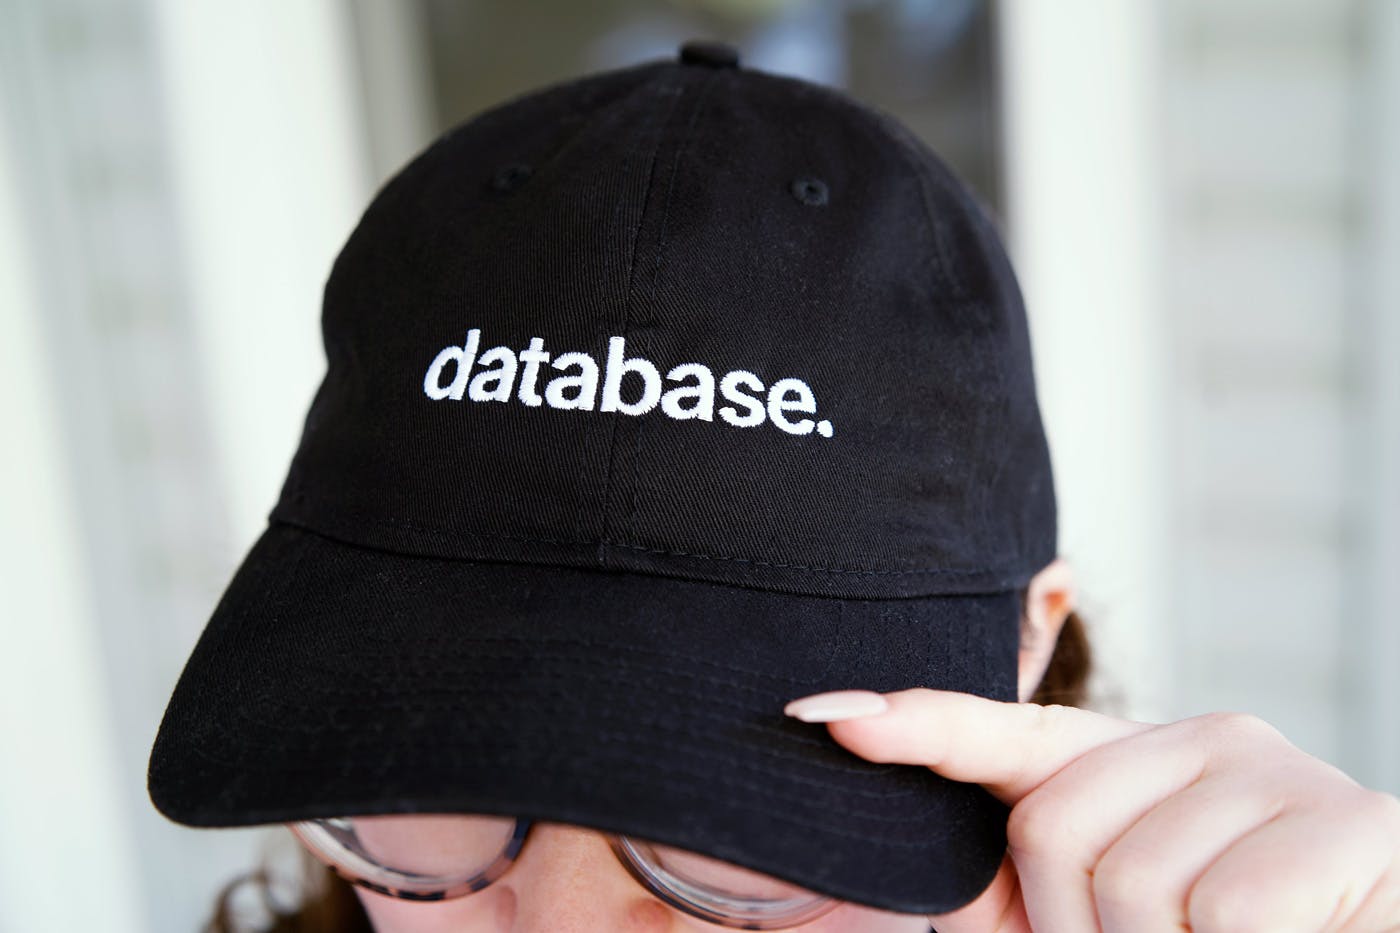 Black baseball cap with “database.” embroidery